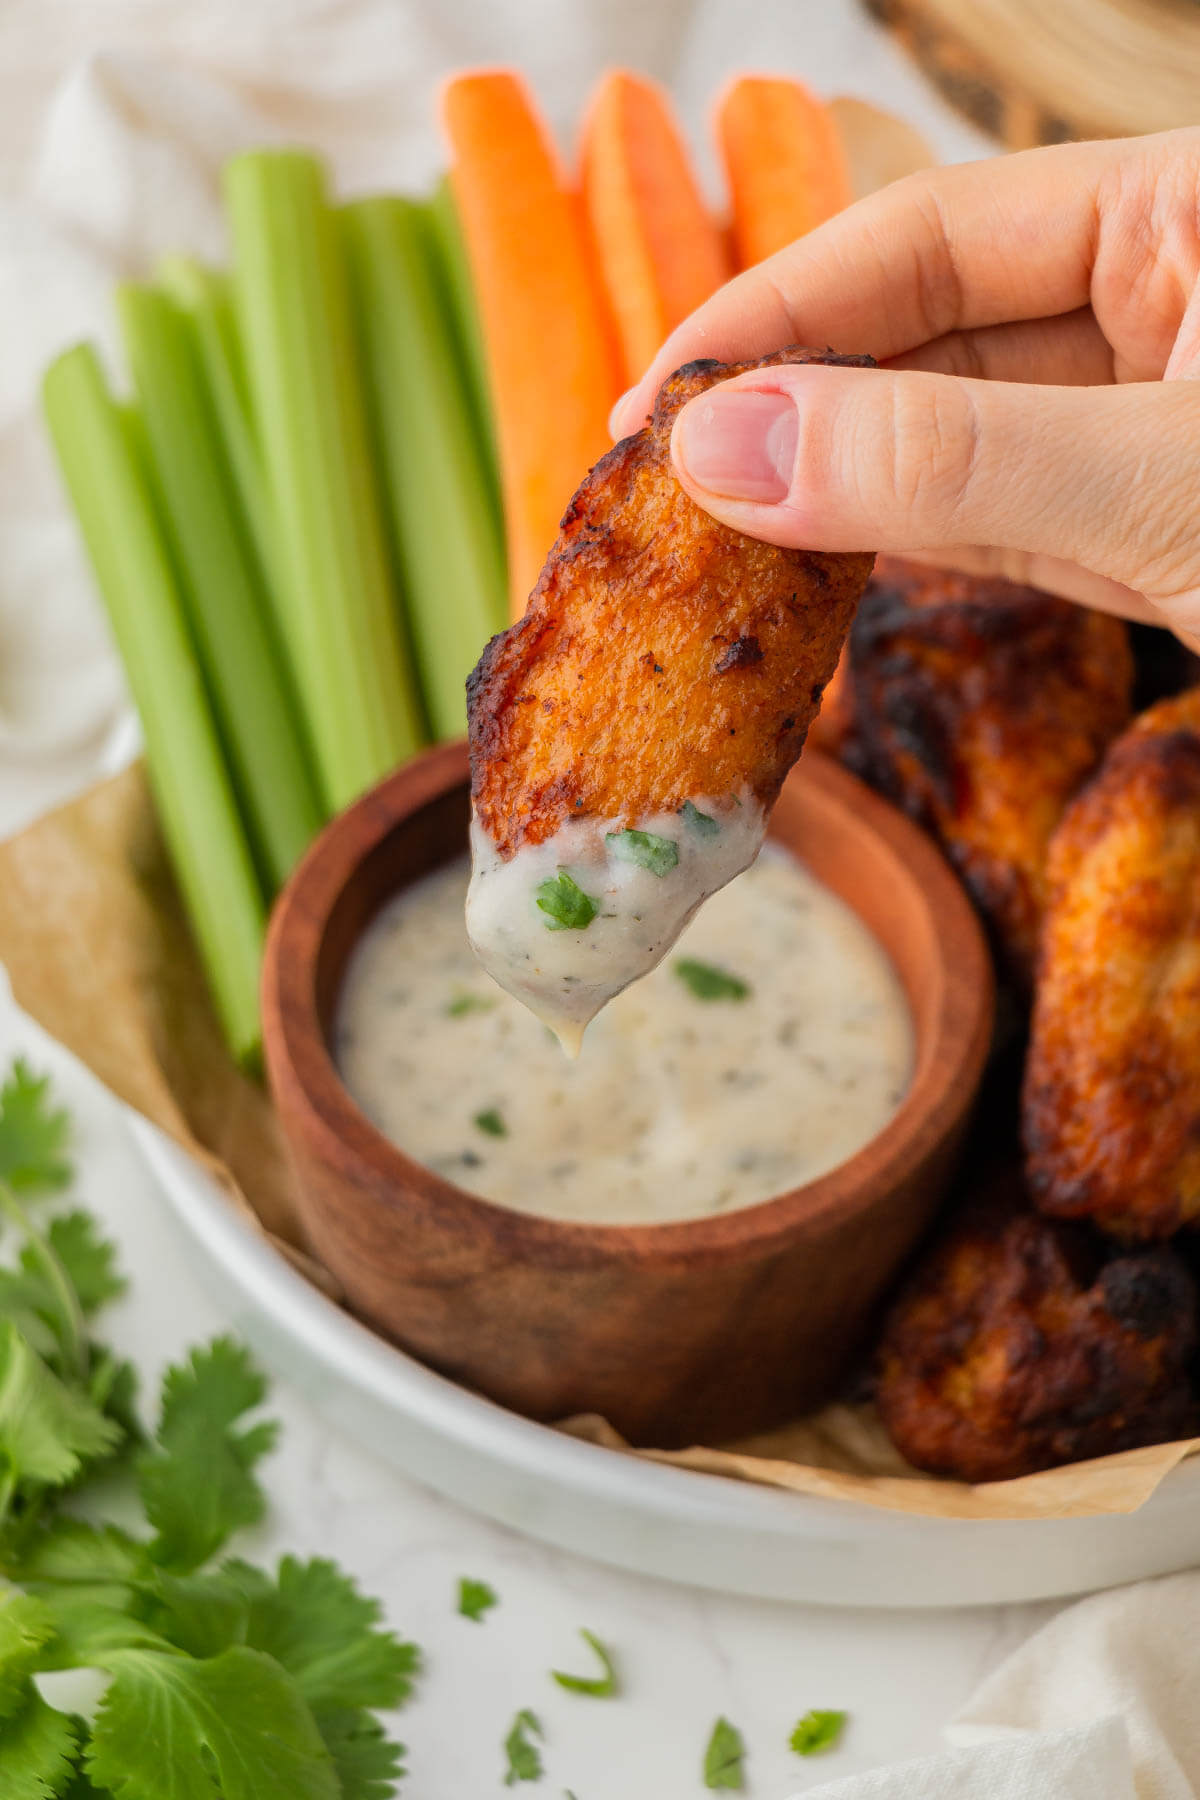 Chicken wing dipped in ranch